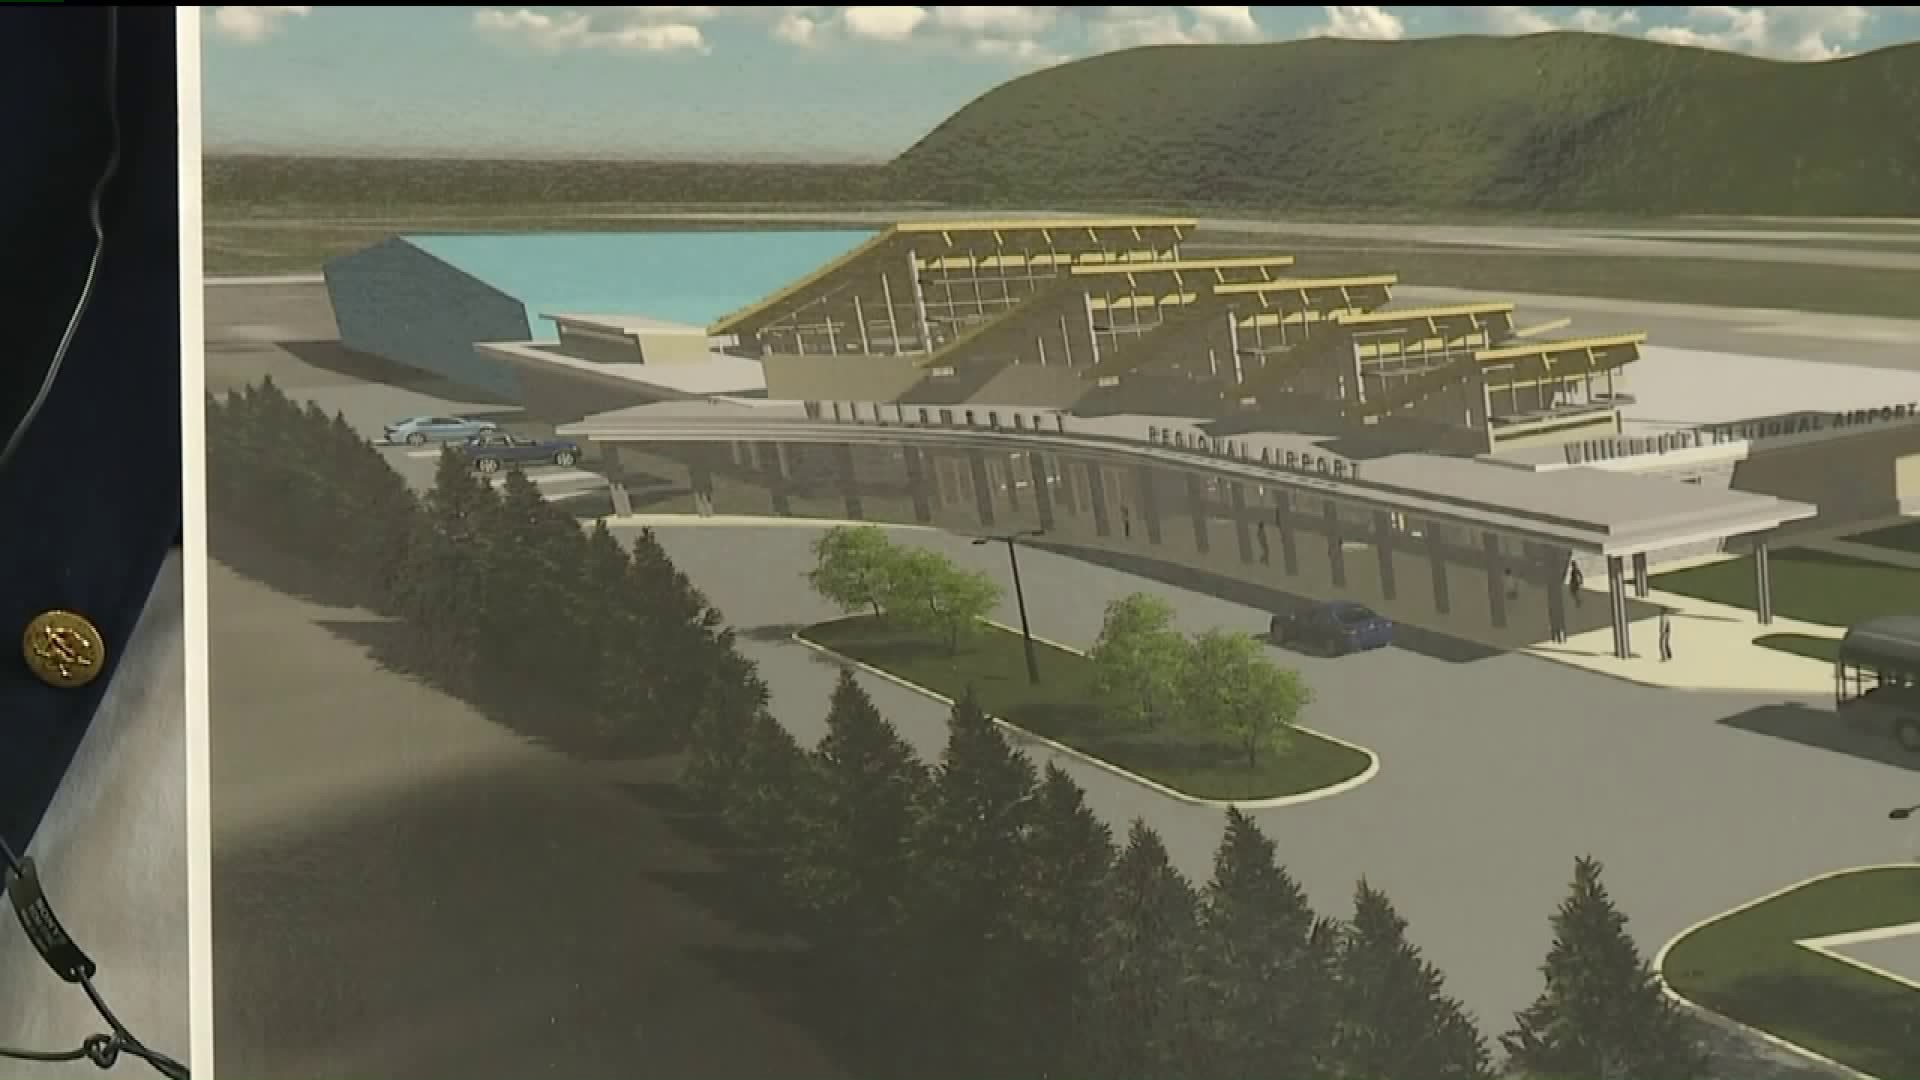 Construction of New Terminal at Airport in Lycoming County Underway